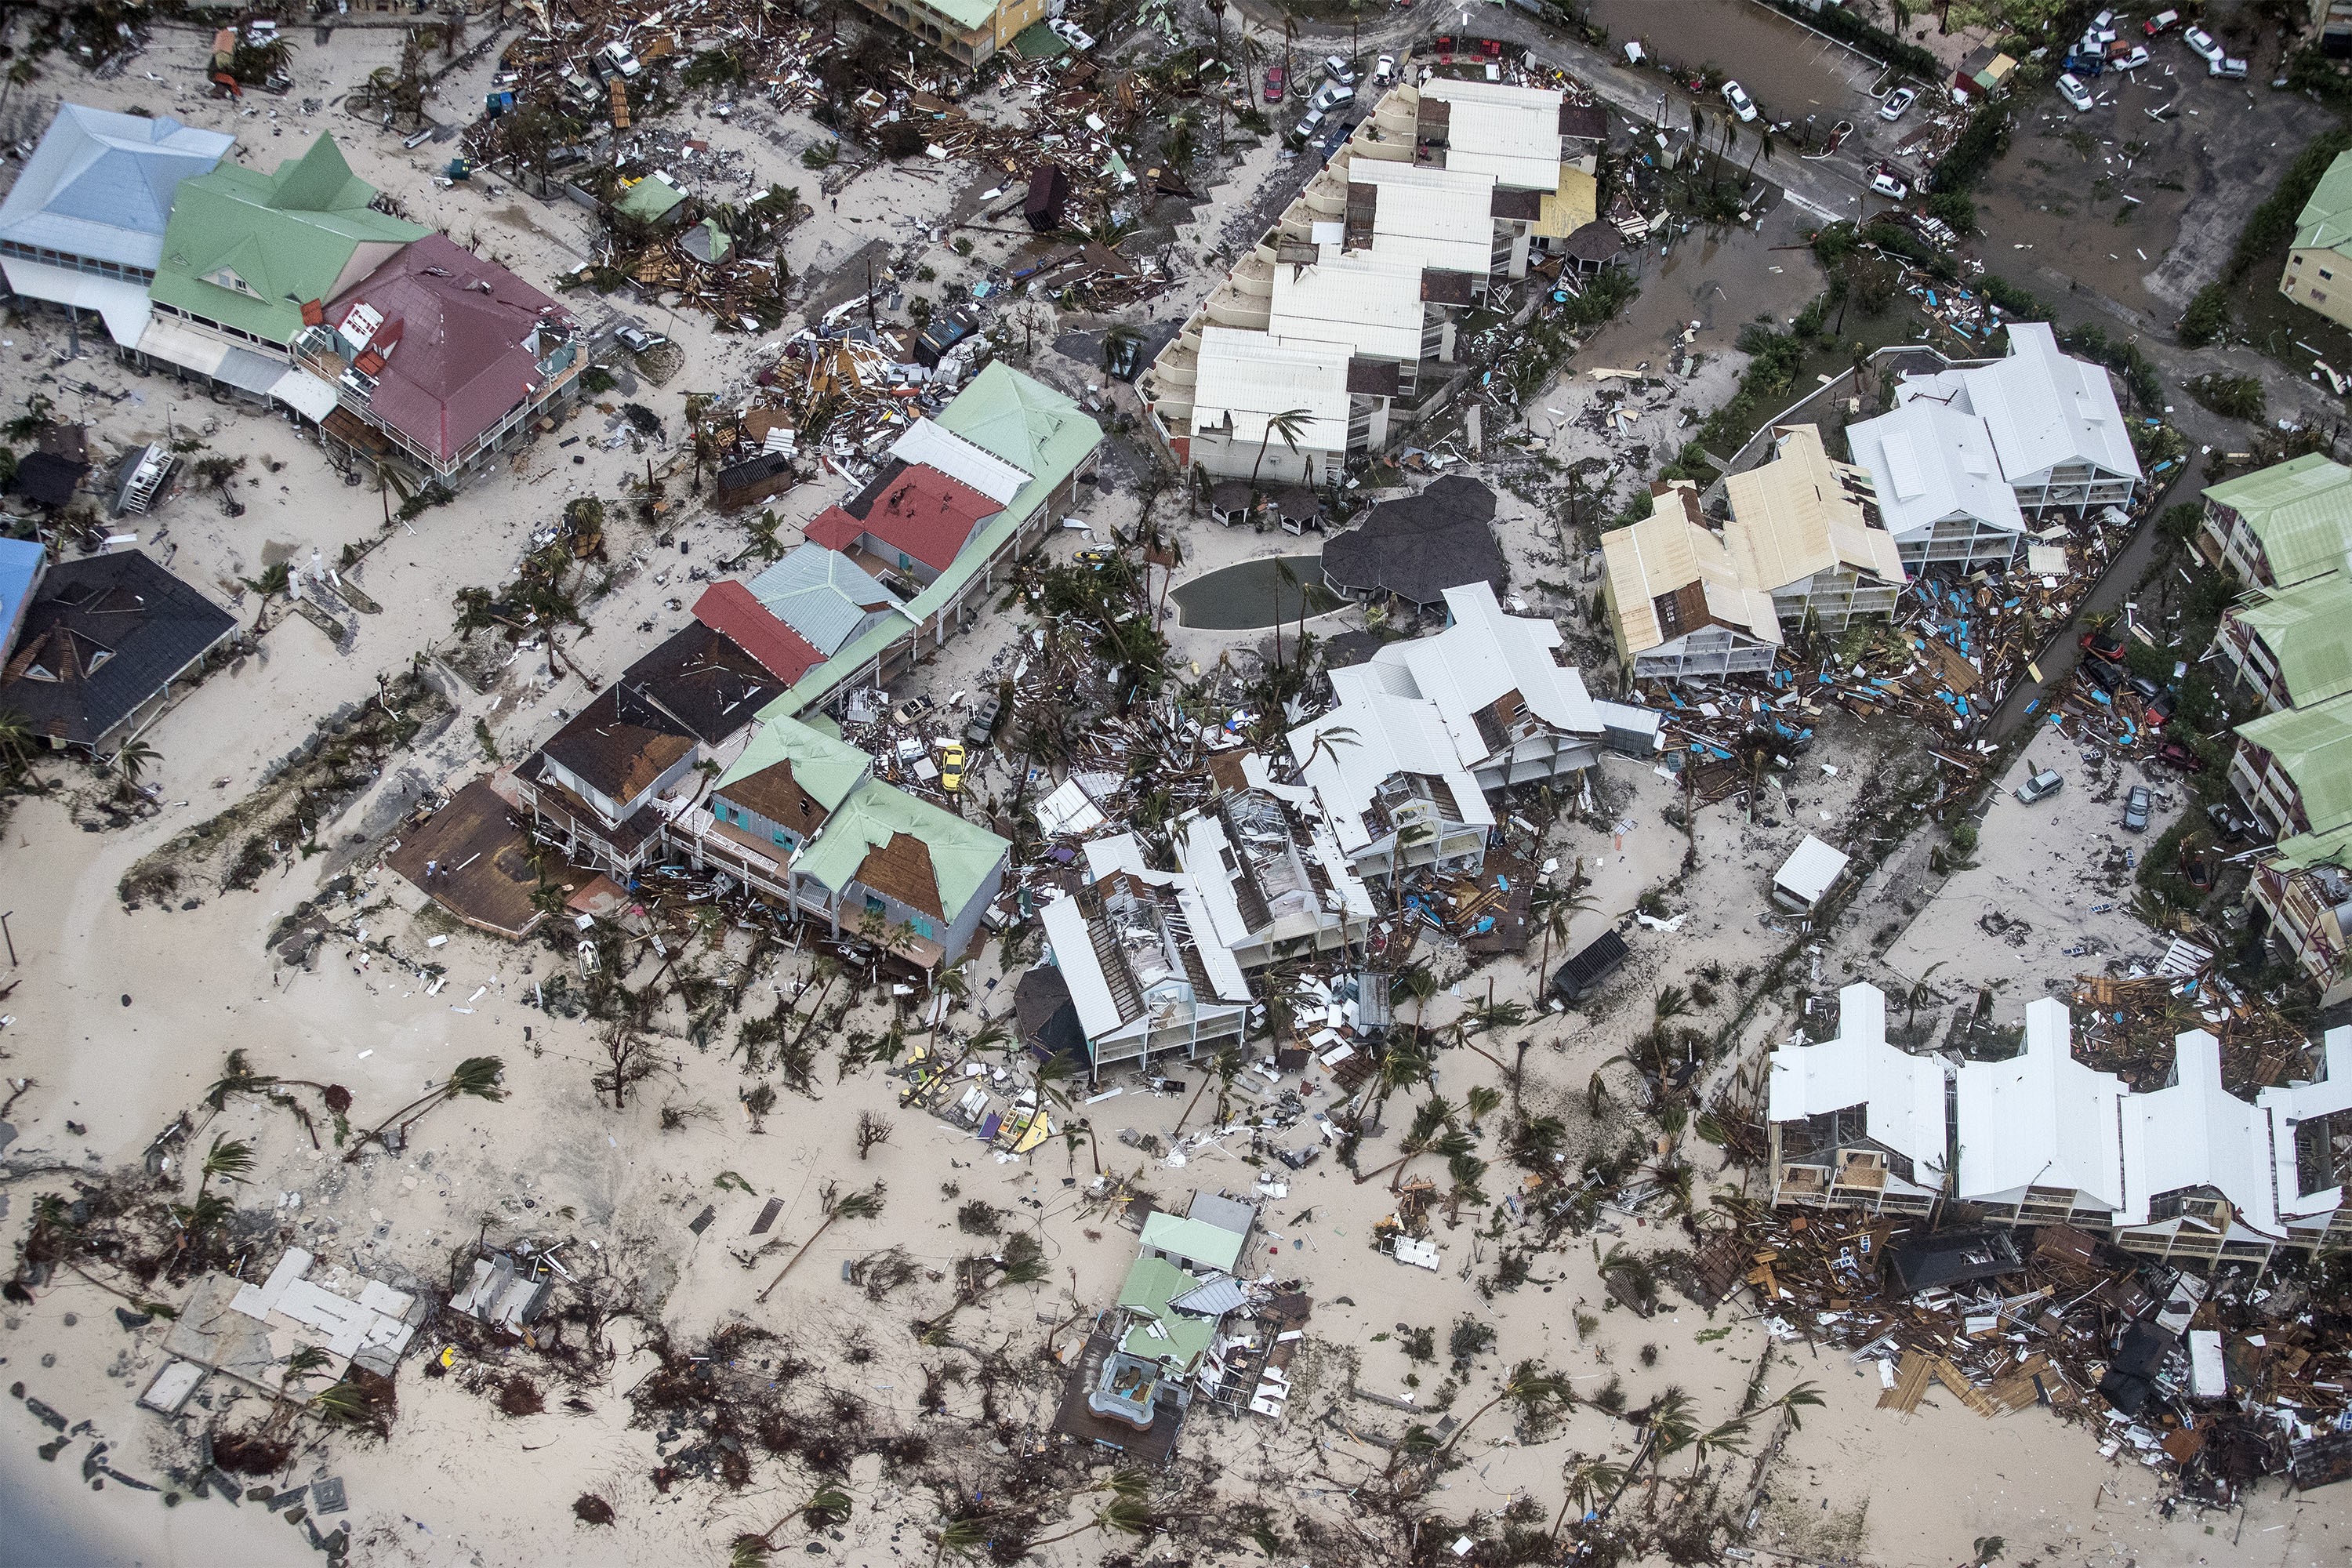 This photo provided by the Dutch Defense Ministry shows storm damage in the aftermath of Hurricane Irma, in St. Maarten. Photo: AP